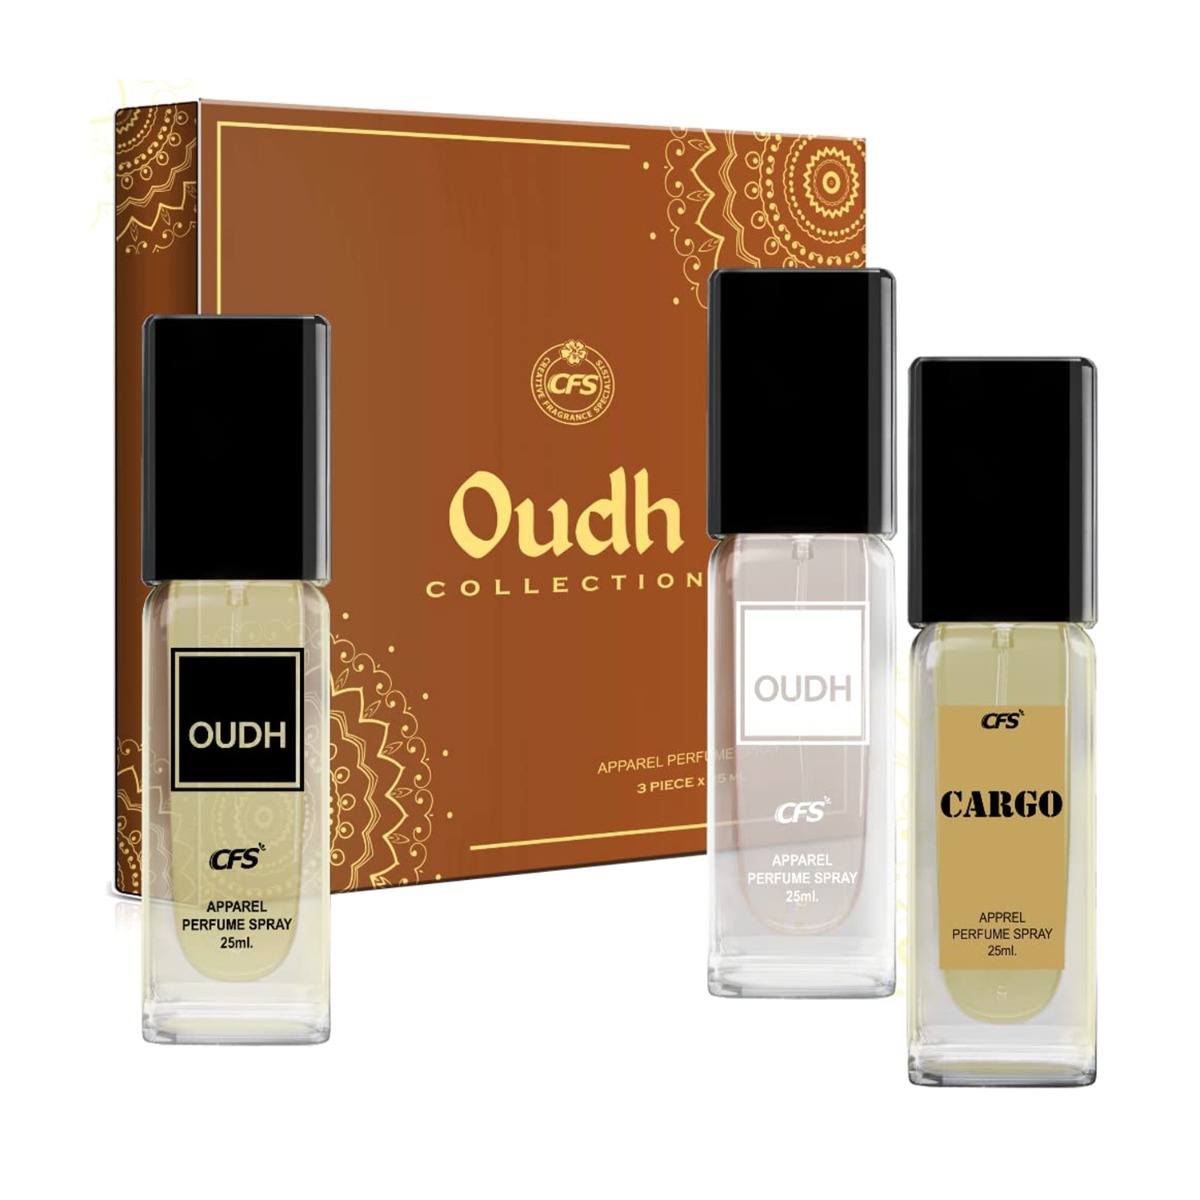 CFS Oudh Collection Apparel Perfume Spray - Pack Of 3, 25ml Each